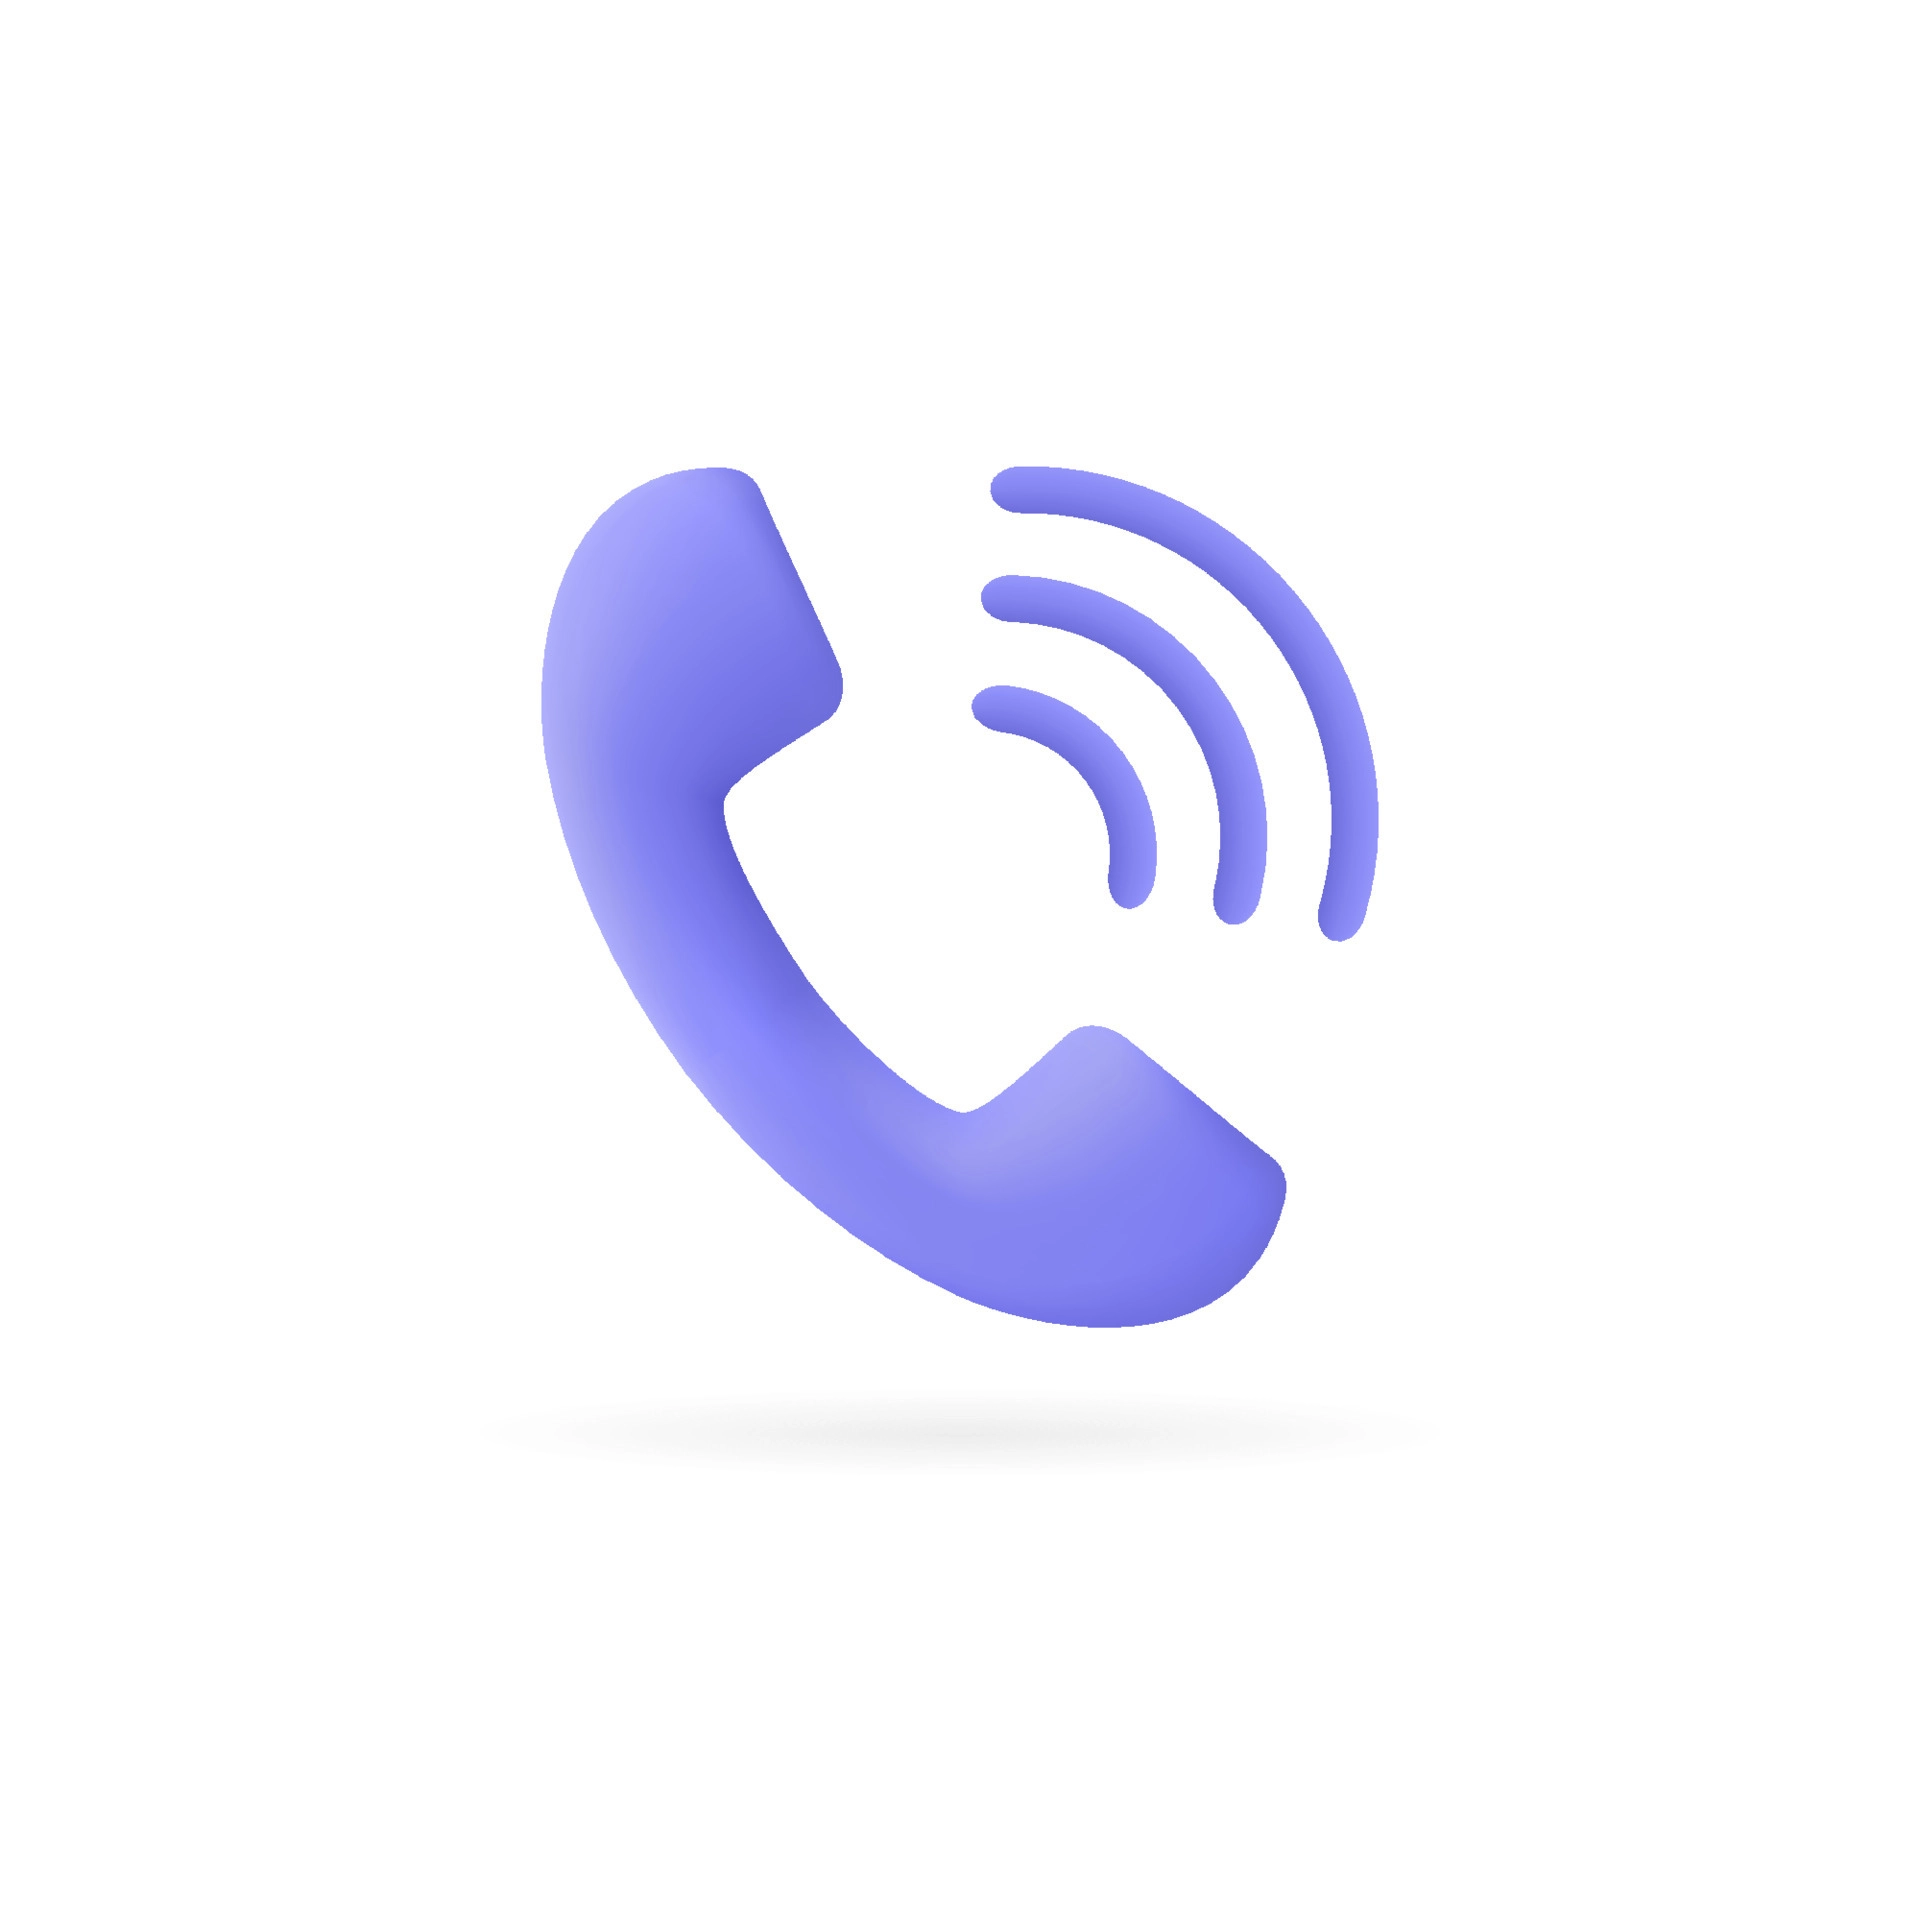 3d handset icon in a minimalist style phone call illustration isolated on white background vector